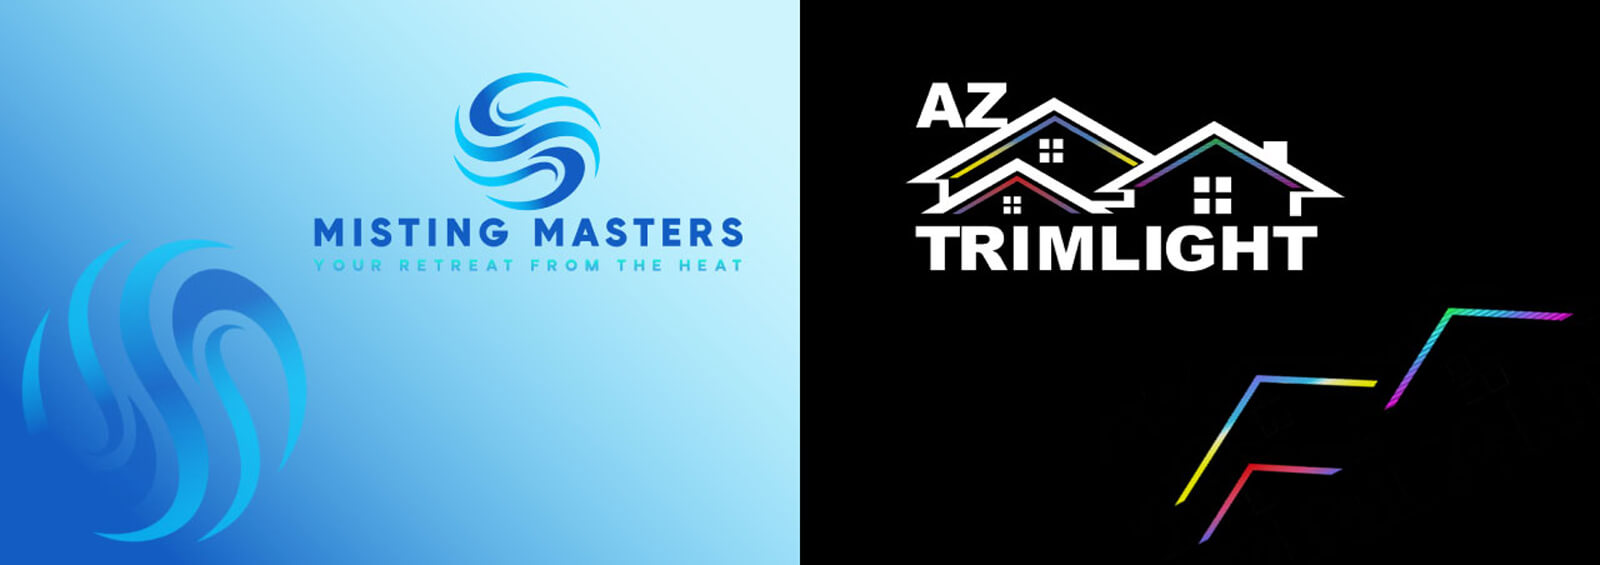 Two logos of the Misting Masters and AZ Trimlight side by side